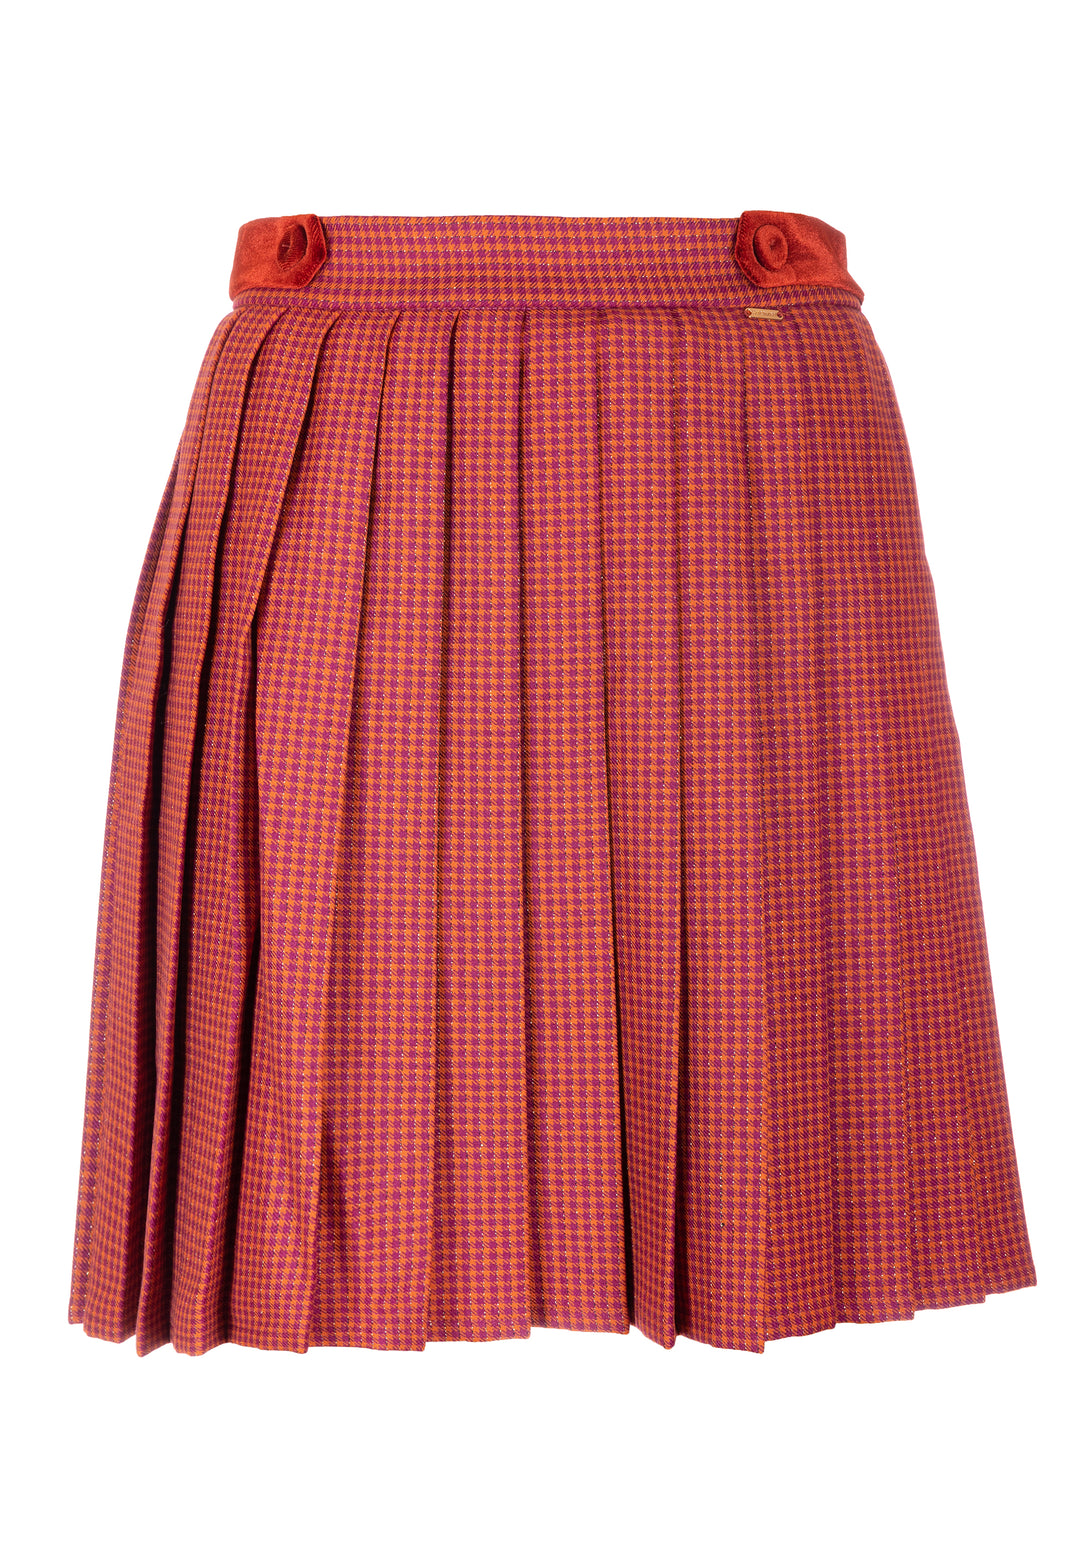 Mini skirt wide fit with folding made in pied de poule fabric